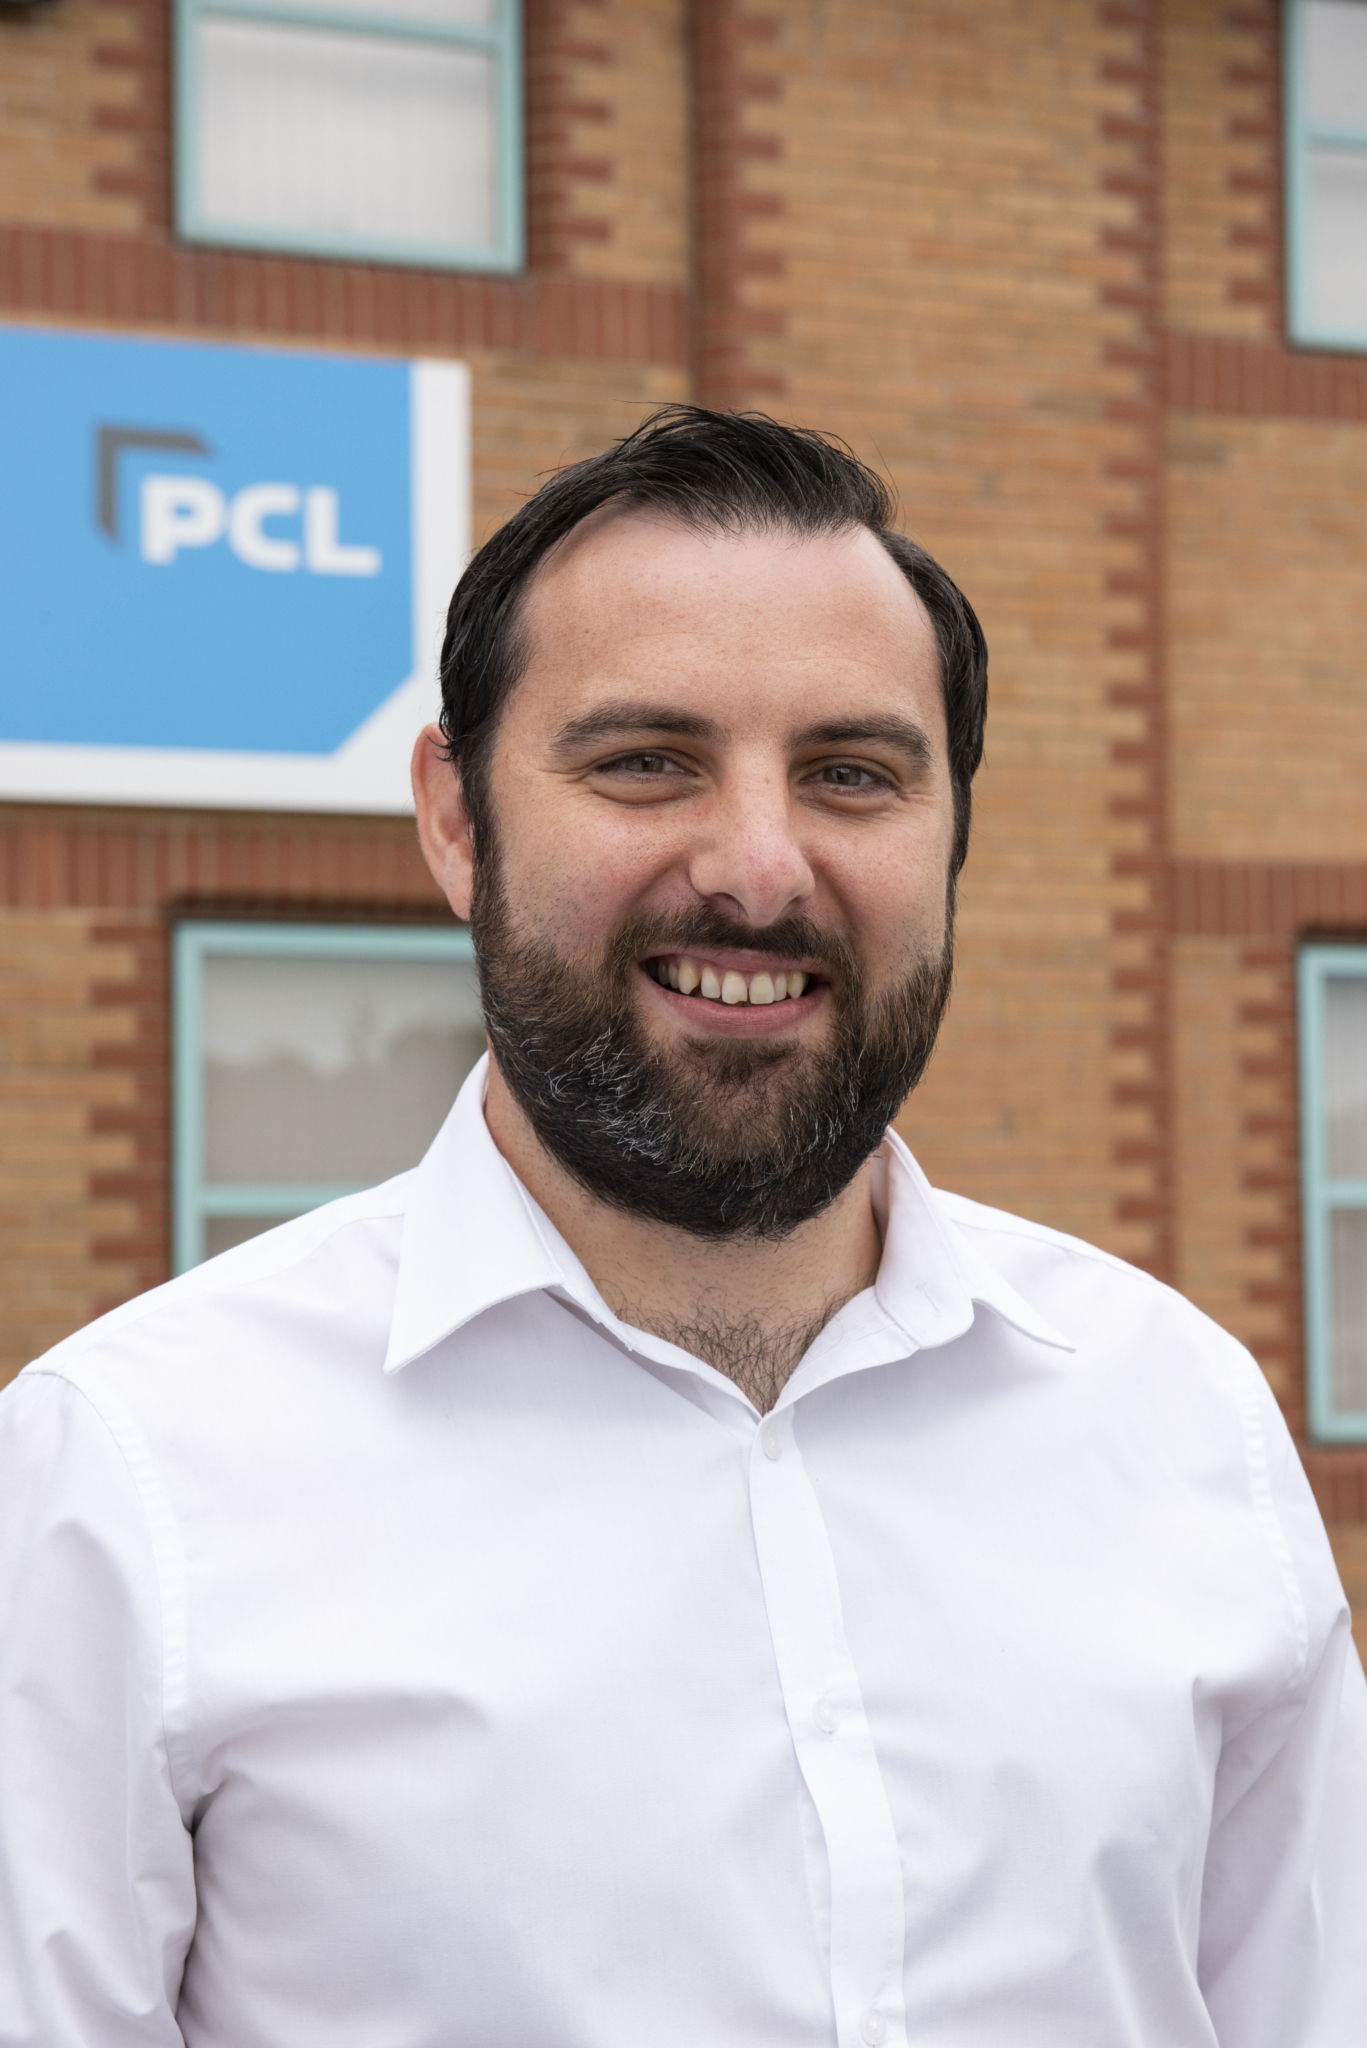 PCL appoints new senior buyer